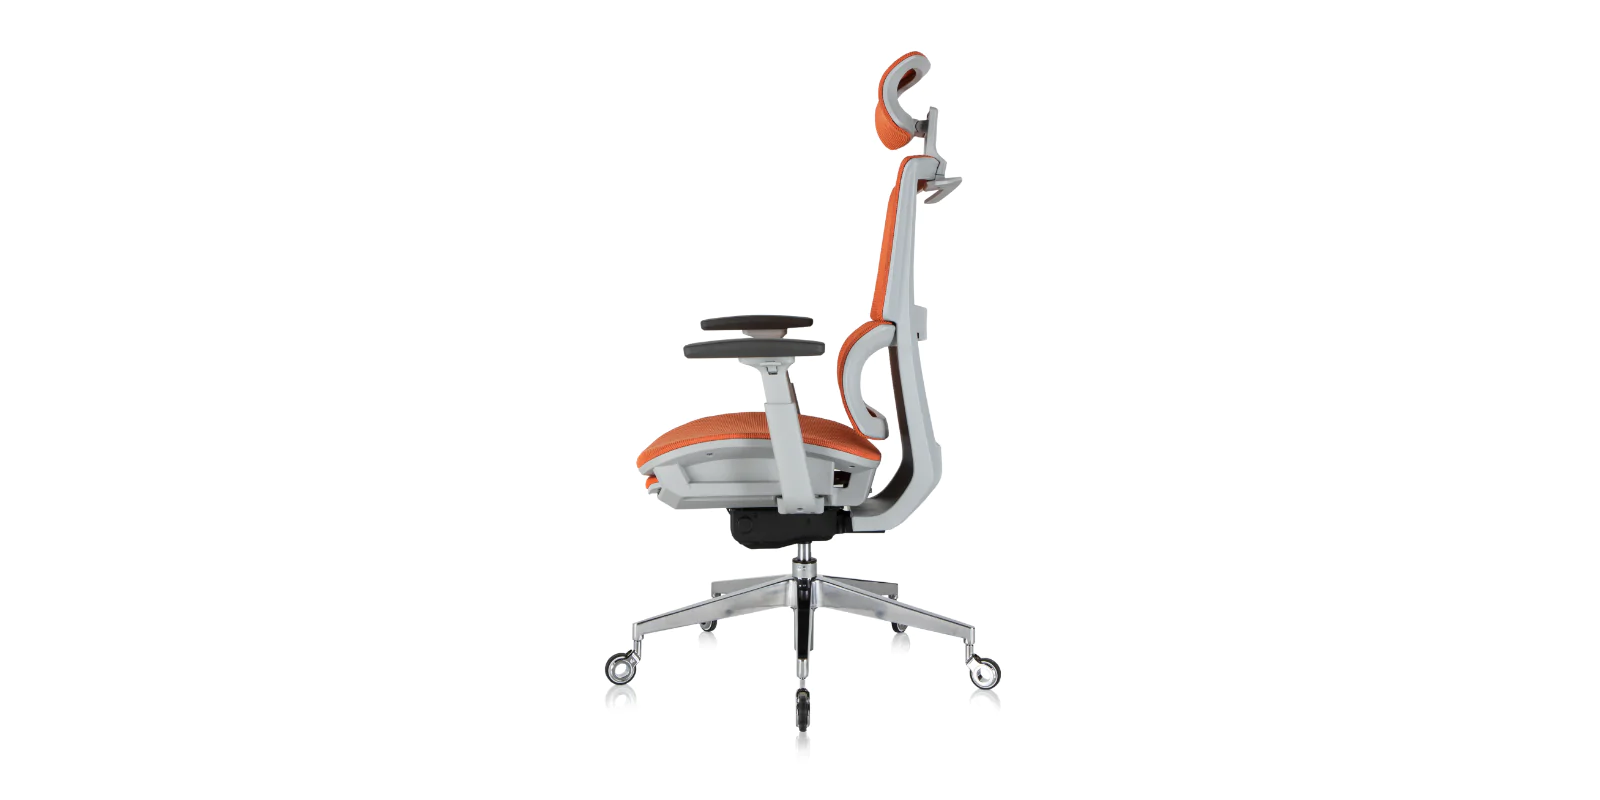 What is the best office chair for sitting for long hours?